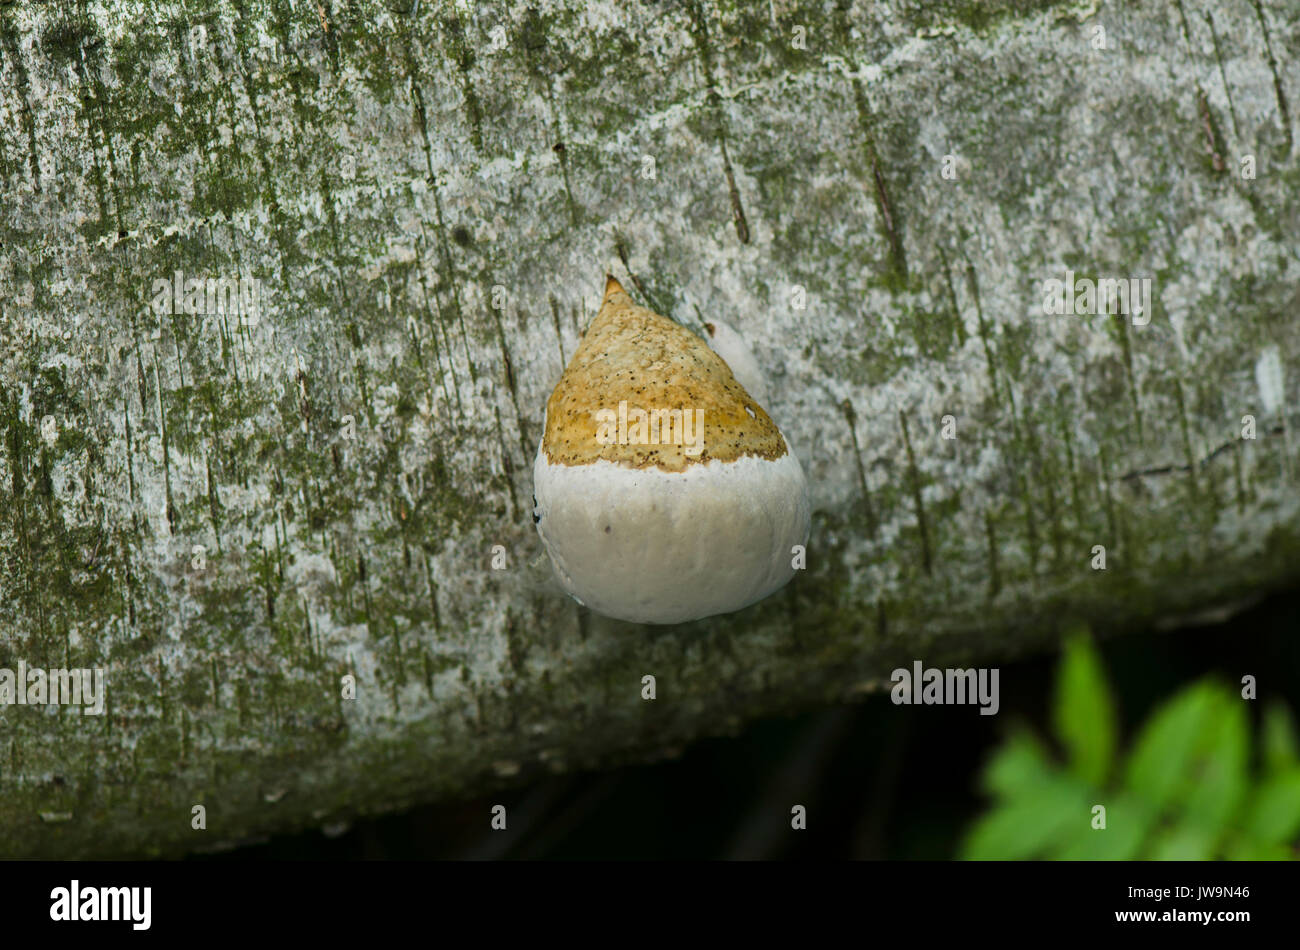 Young Fomitopsis pinicola, red belt conk, mushroom, decay fungus on bark of tree. Netherlands. Stock Photo